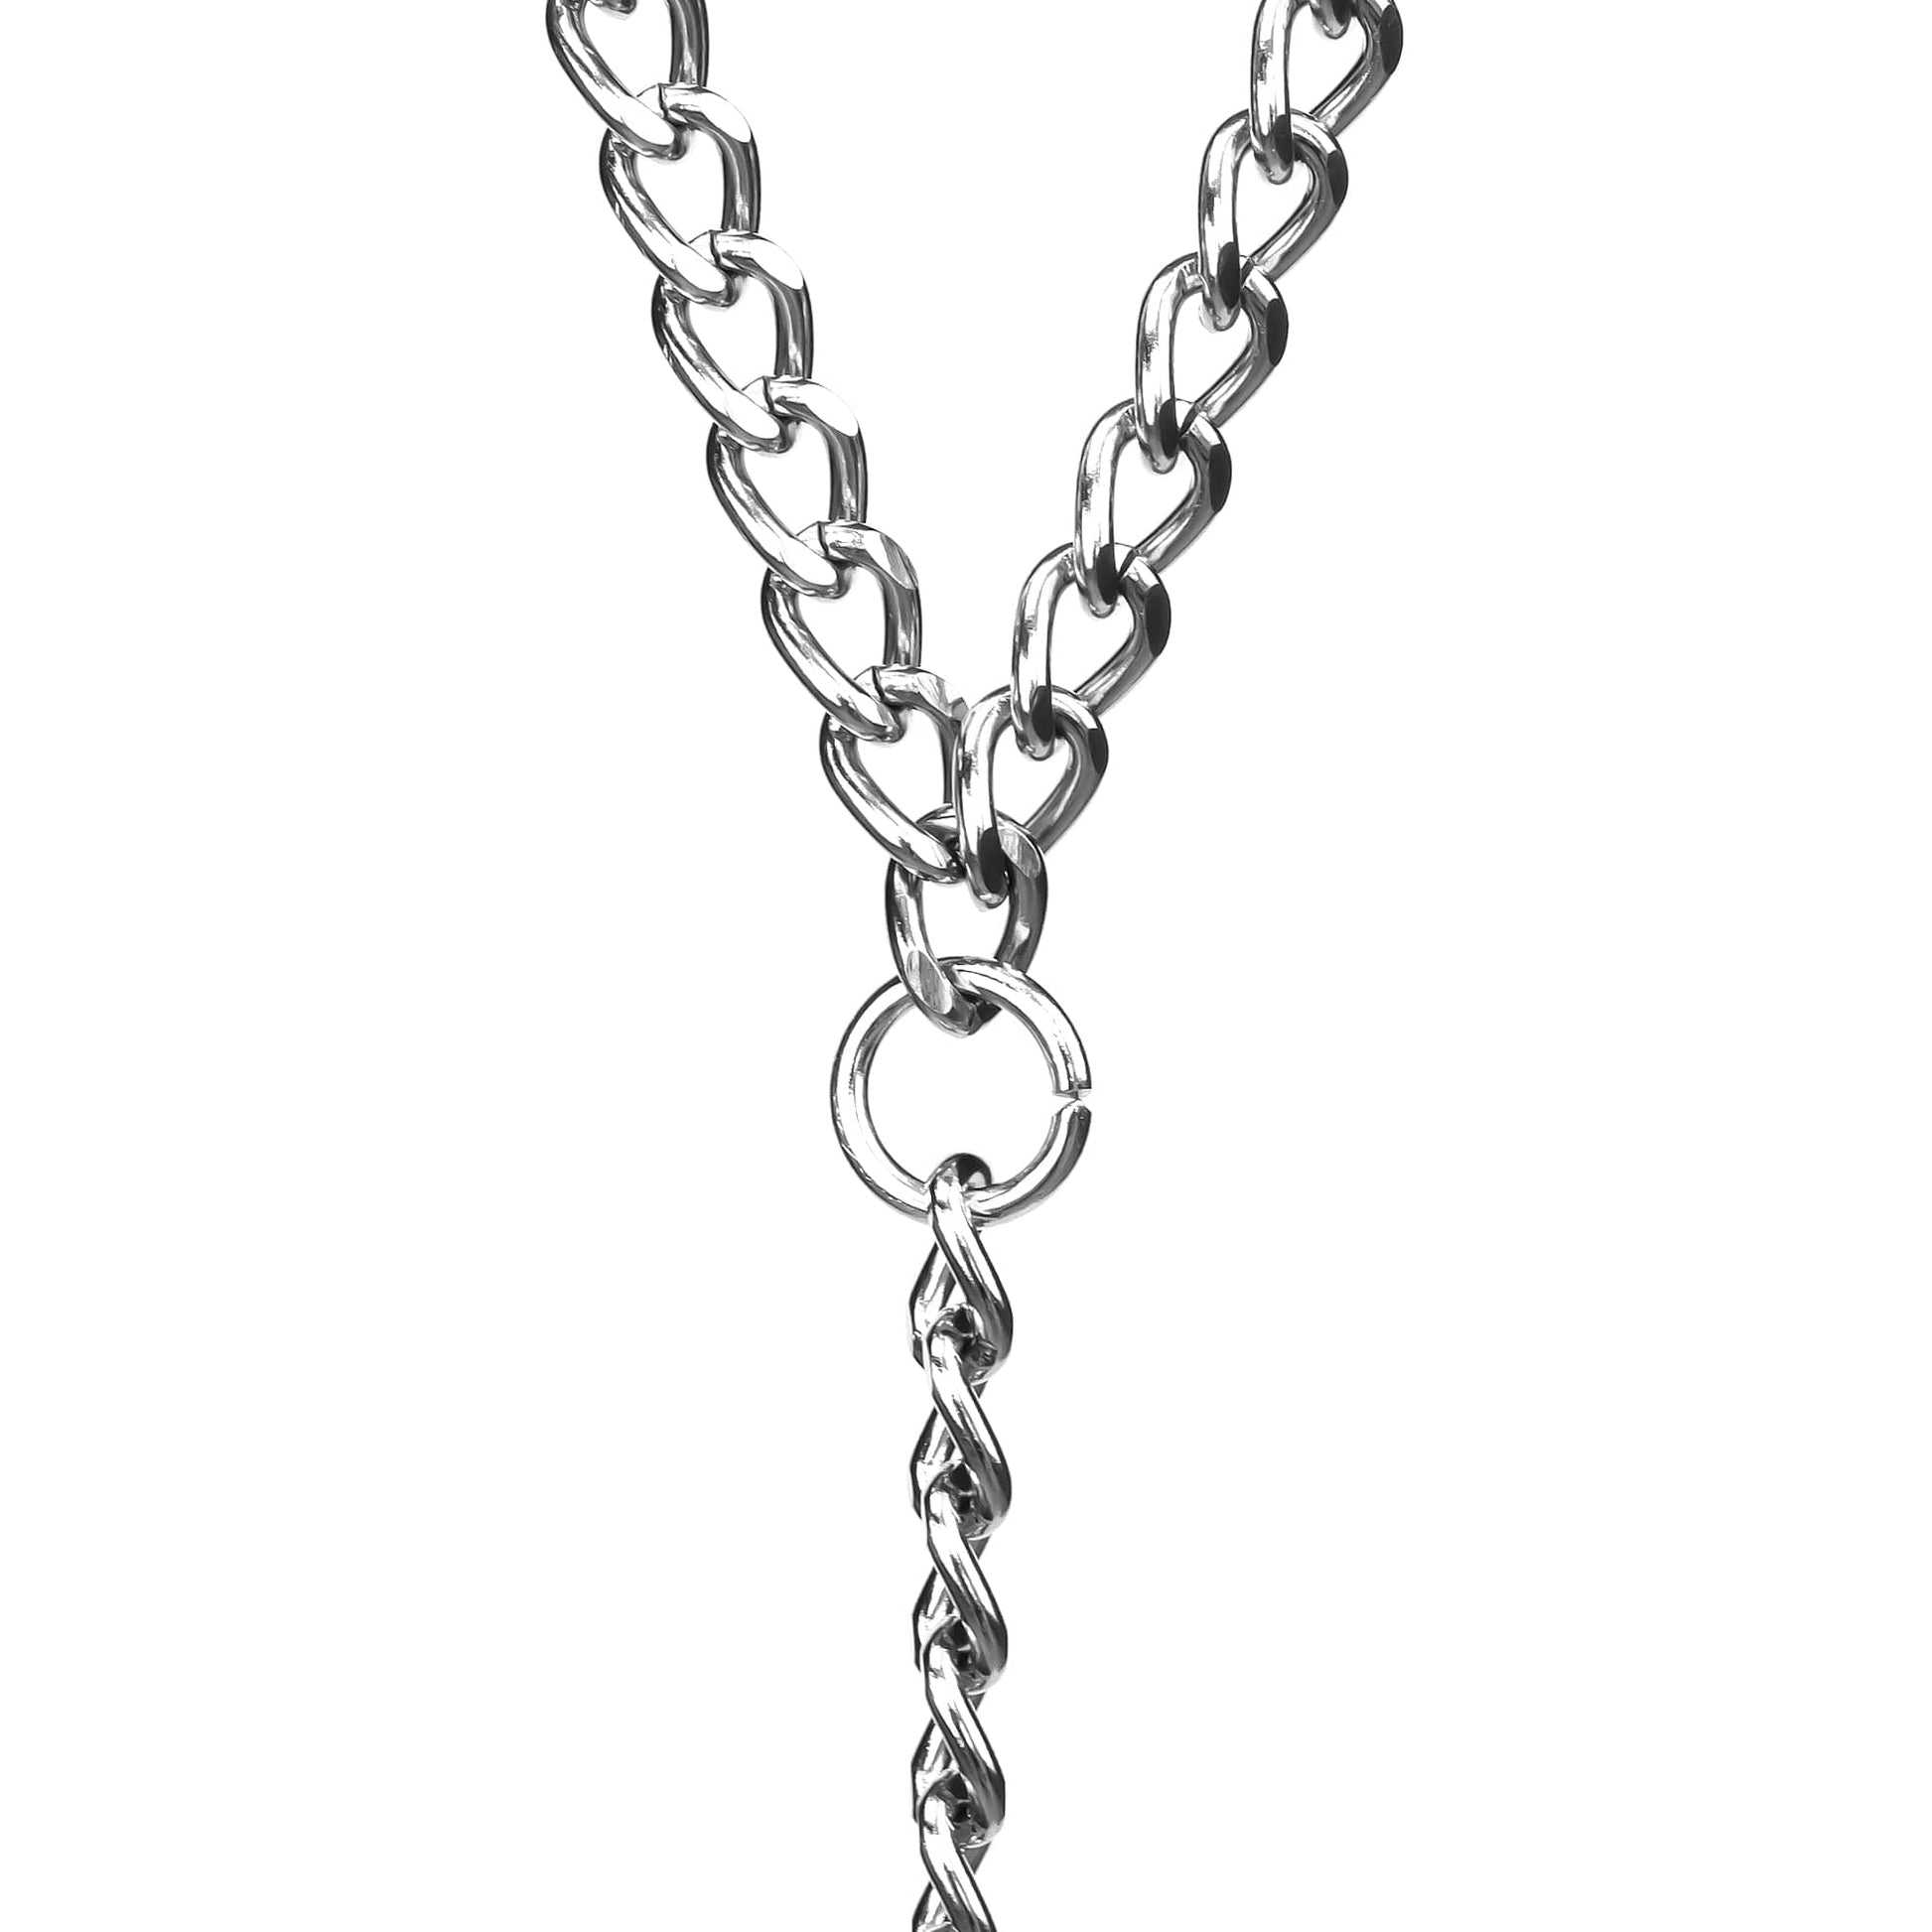 High quality hardware chain of the nipple clit tassel clamp with chain